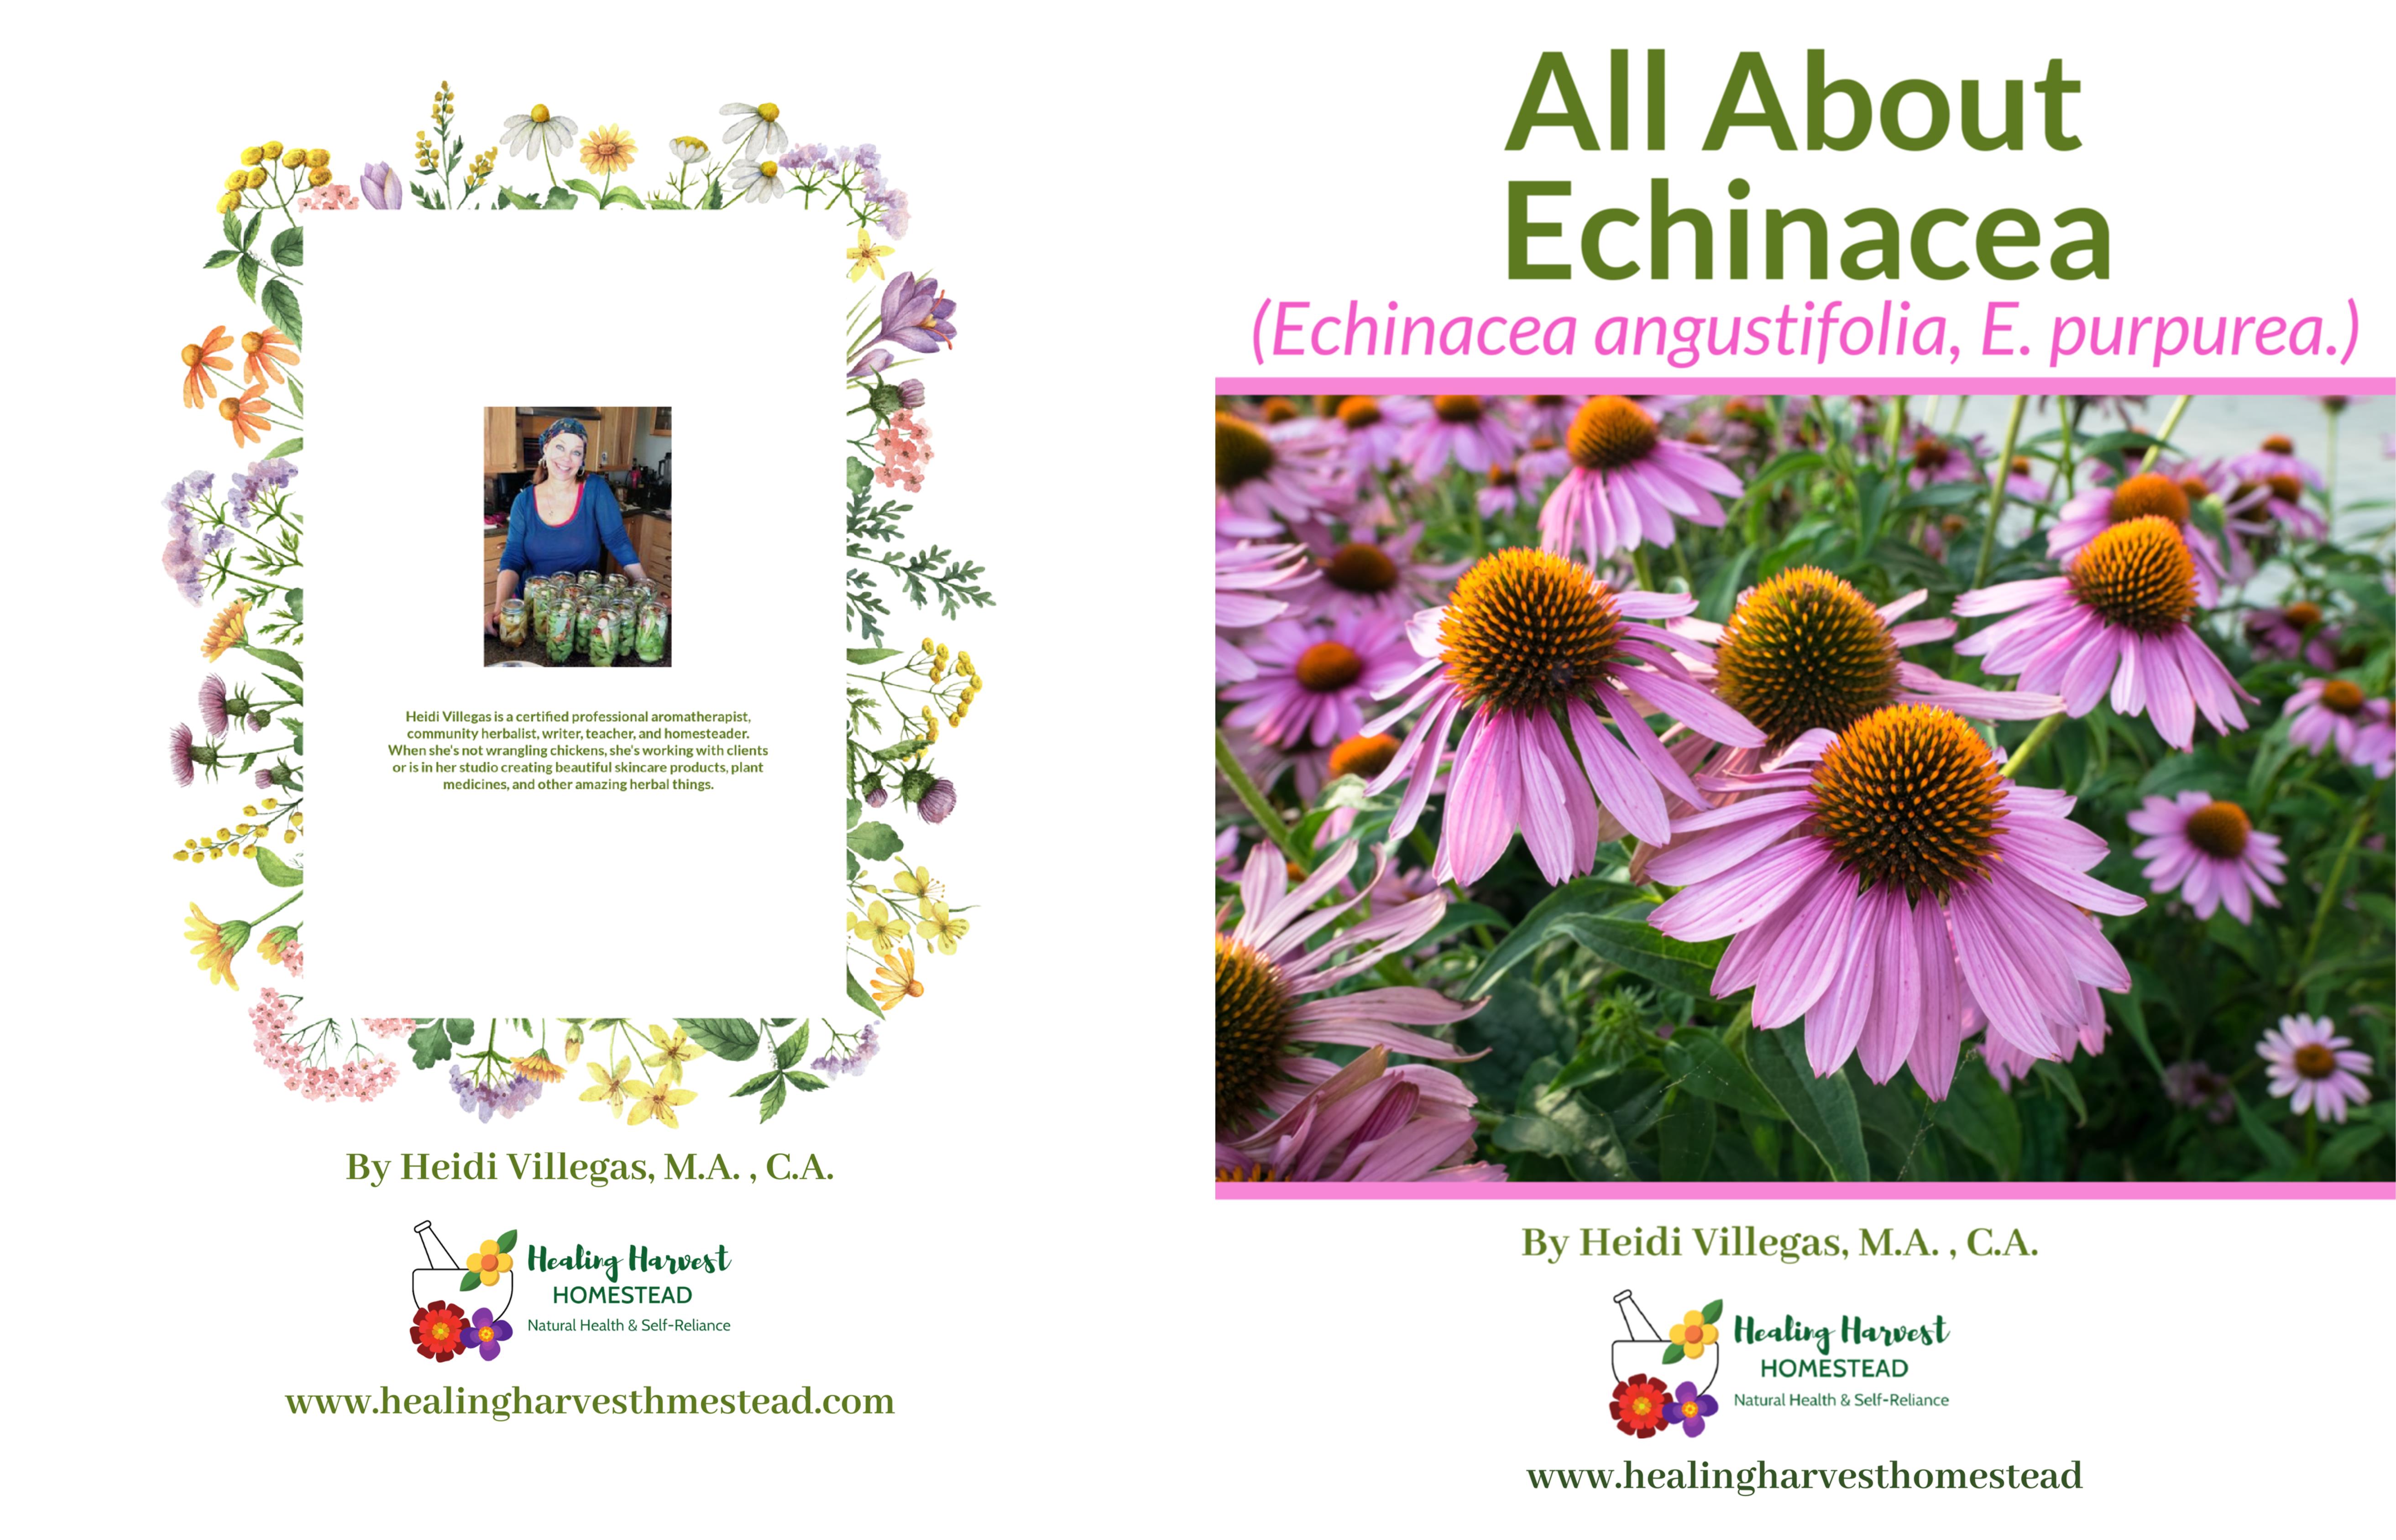 All About Echinacea cover image